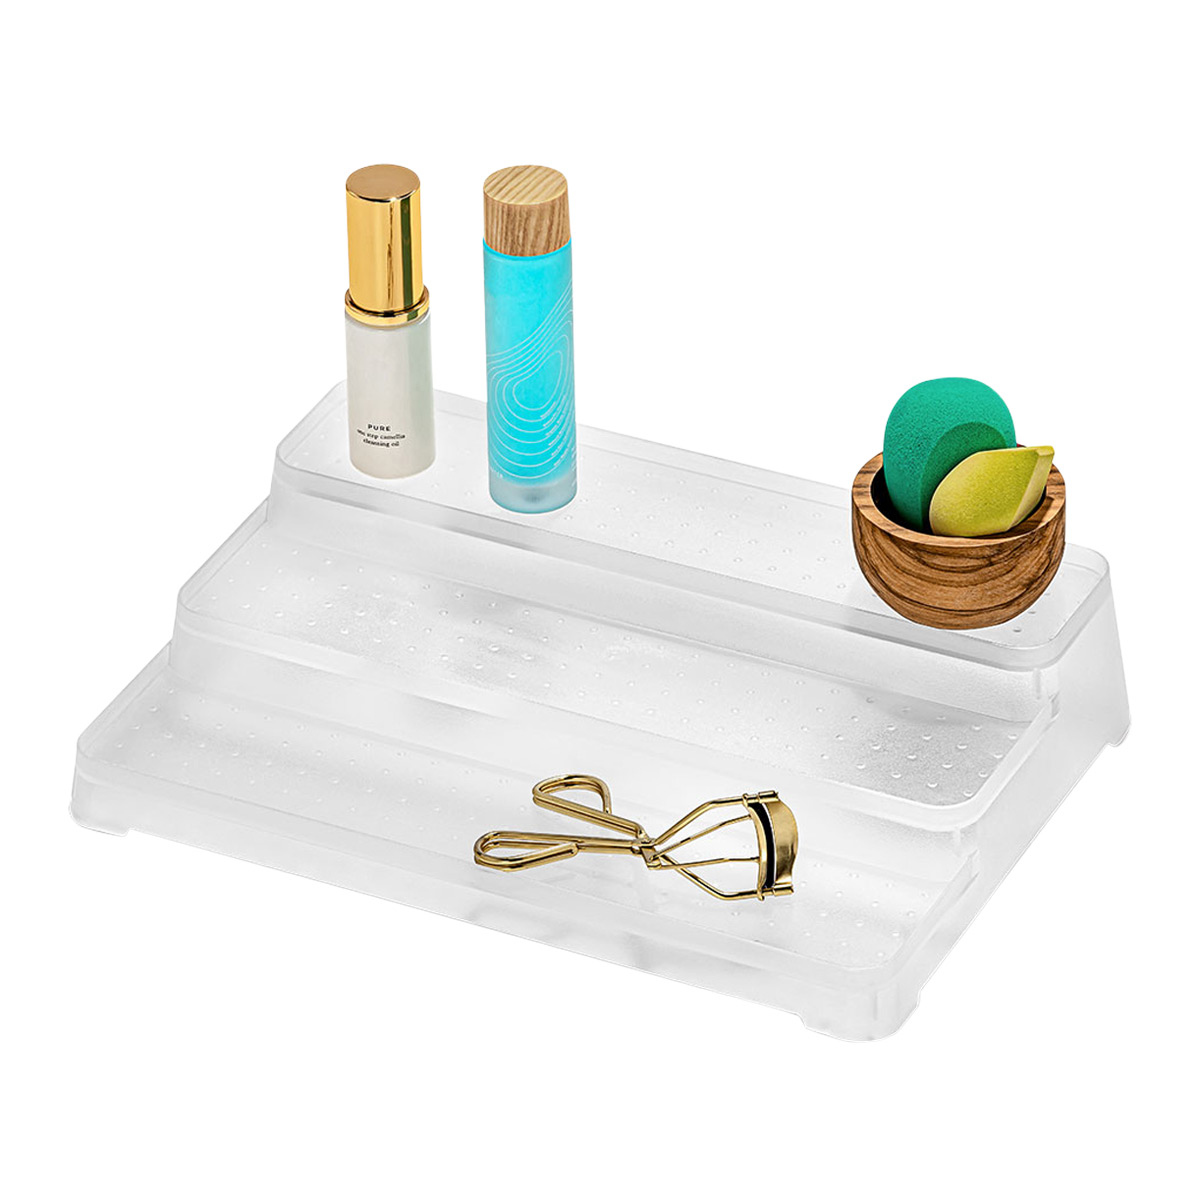 https://www.containerstore.com/catalogimages/428648/10085413-madesmart-3-Level-Organizer.jpg